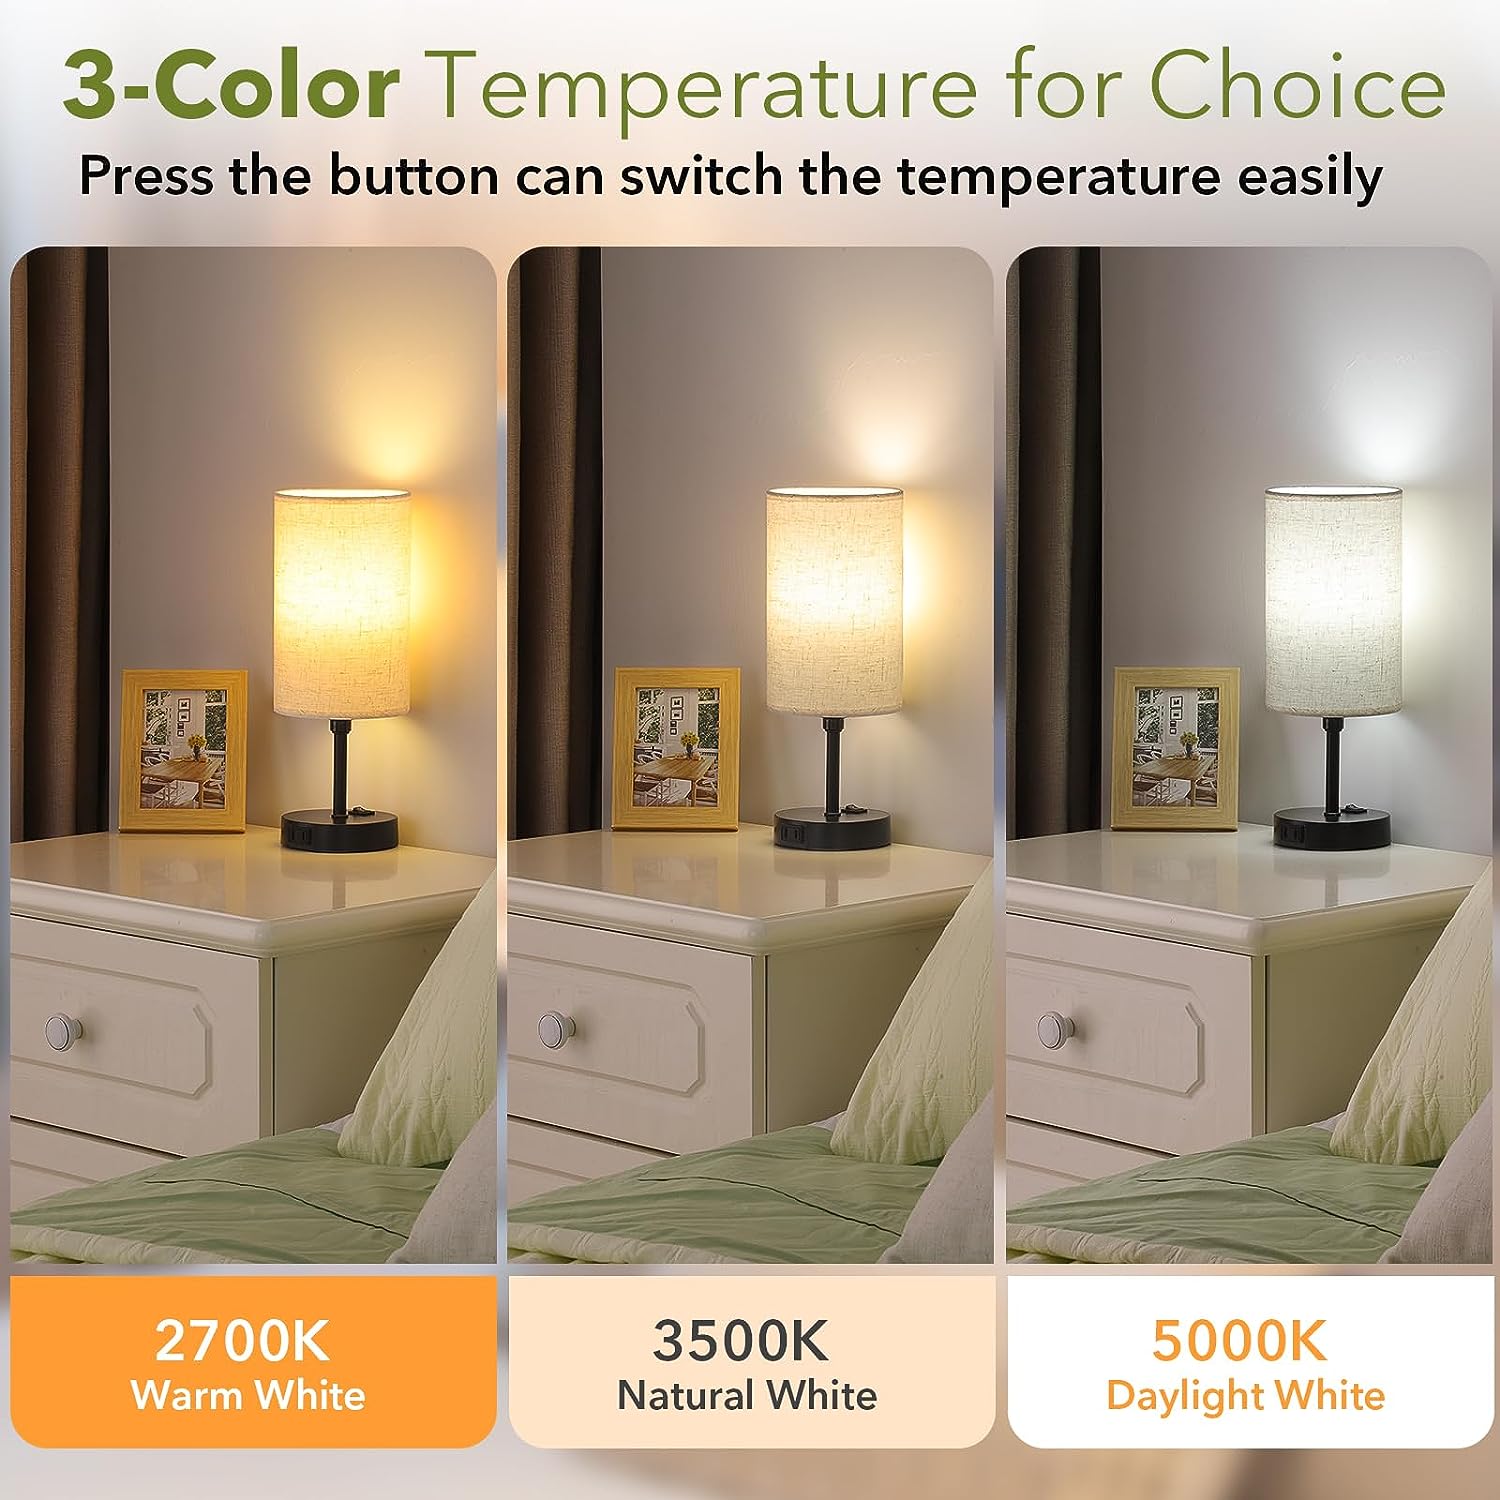 Bedside Table Lamp, 3-Color Modes Bedroom Lamps 2700K 3500K 5000K with AC Outlet, Linen Cylindrical Lampshade for Livingroom Nightstand Office Reading Working(2-Pack, Bulb Included)